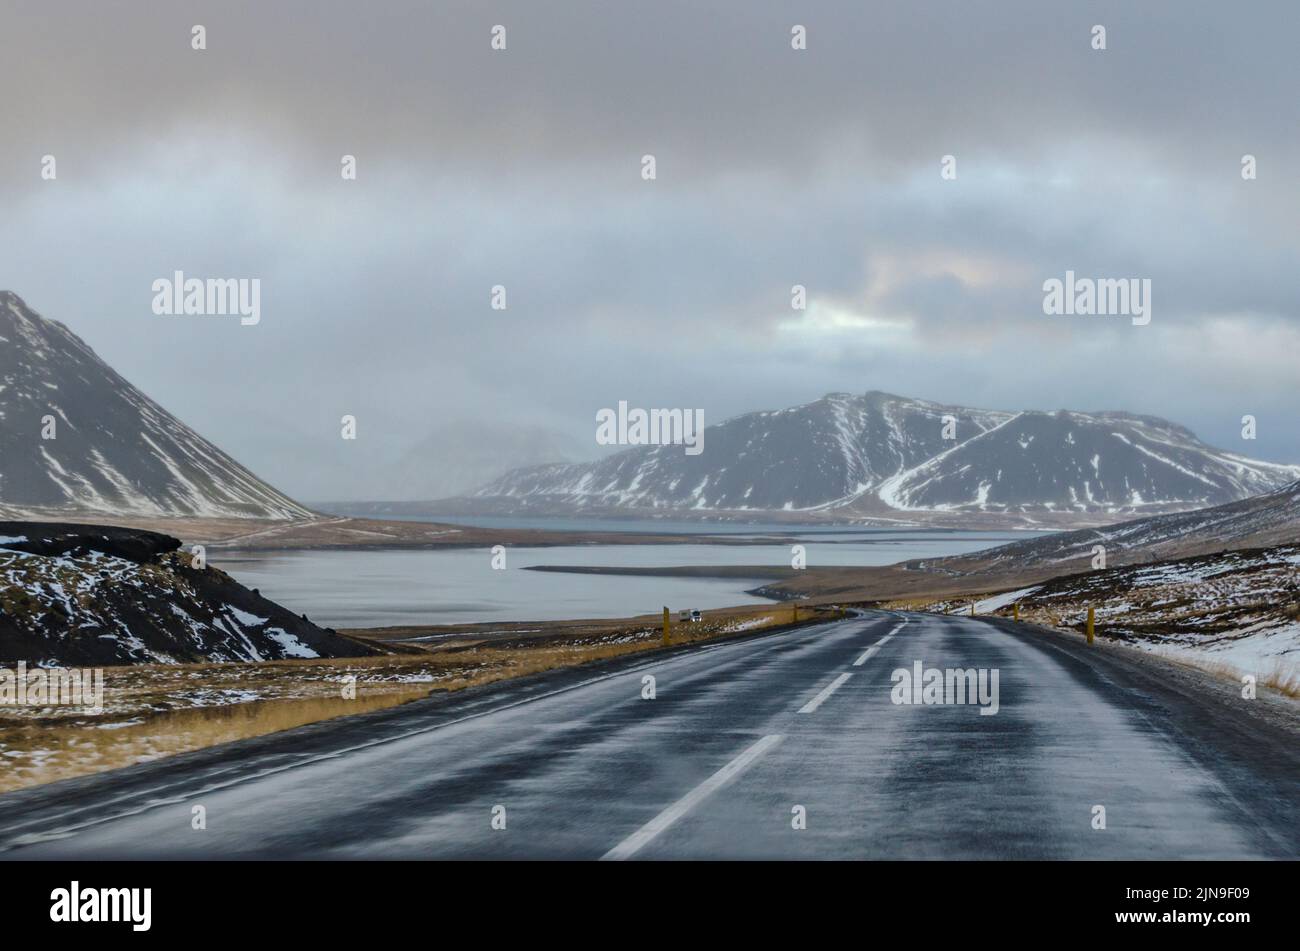 Driving through Iceland on a cold and rainy winter day, every curve in the road reveals views of epic proportions, be they mountains, fjords, or valle Stock Photo